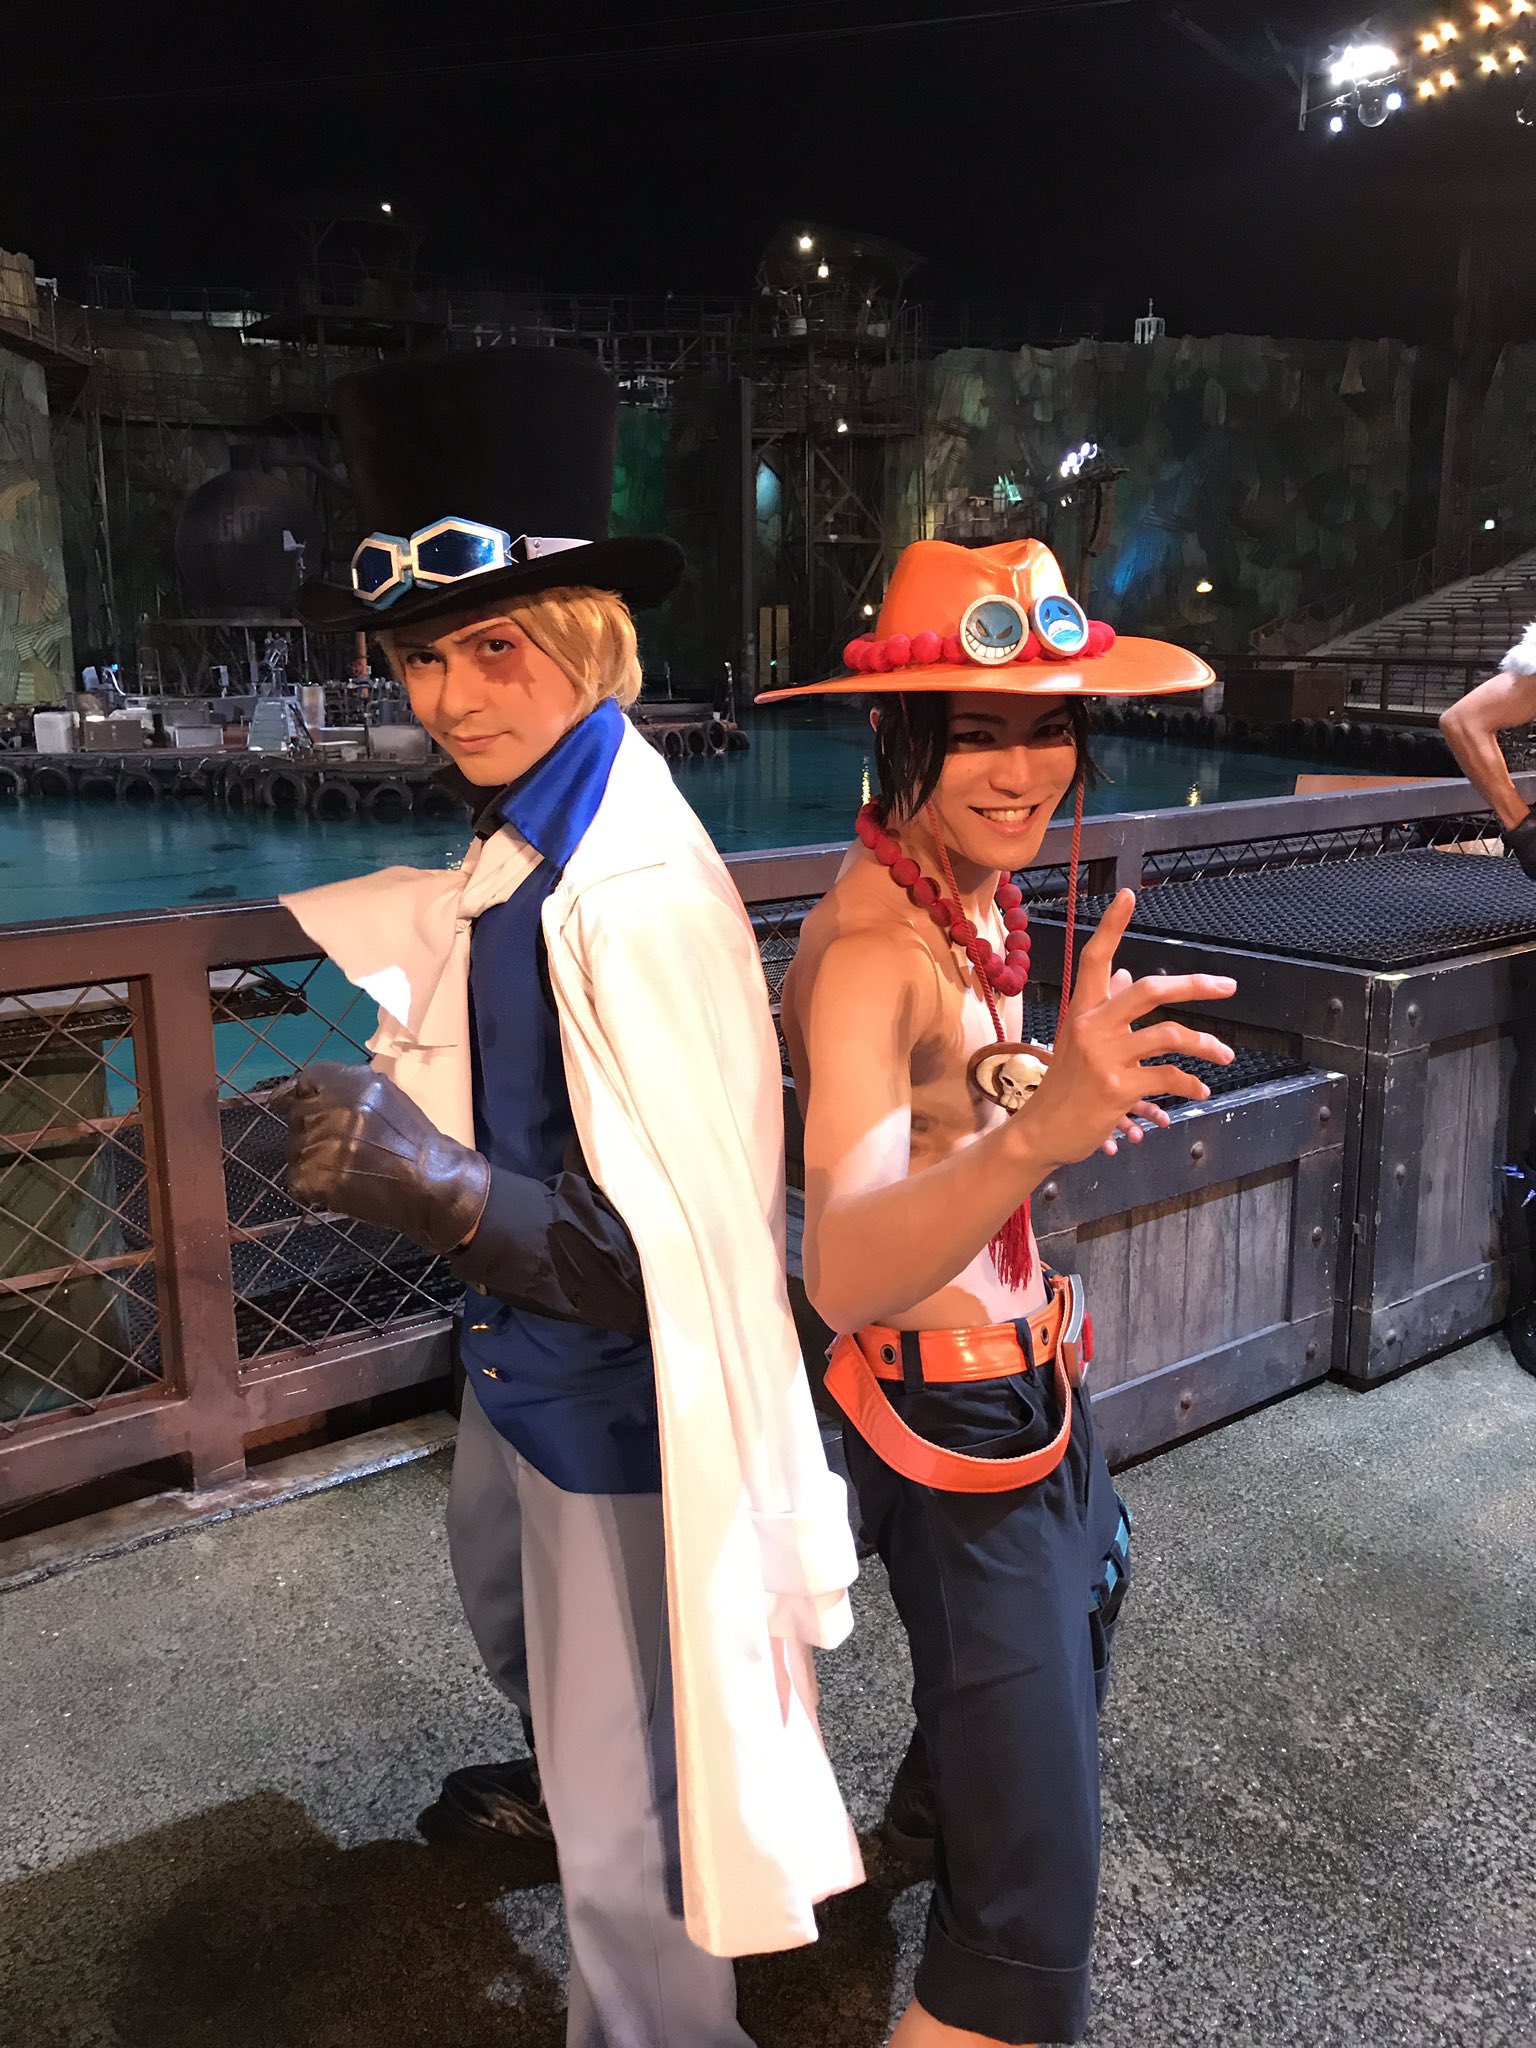 One Piece スタッフ 公式 Official Special Show And Greetings At Usj Wait Everyone Looks So Cool And The Show Is So Tense Sabo And Ace Accepted To Pose Next To Each